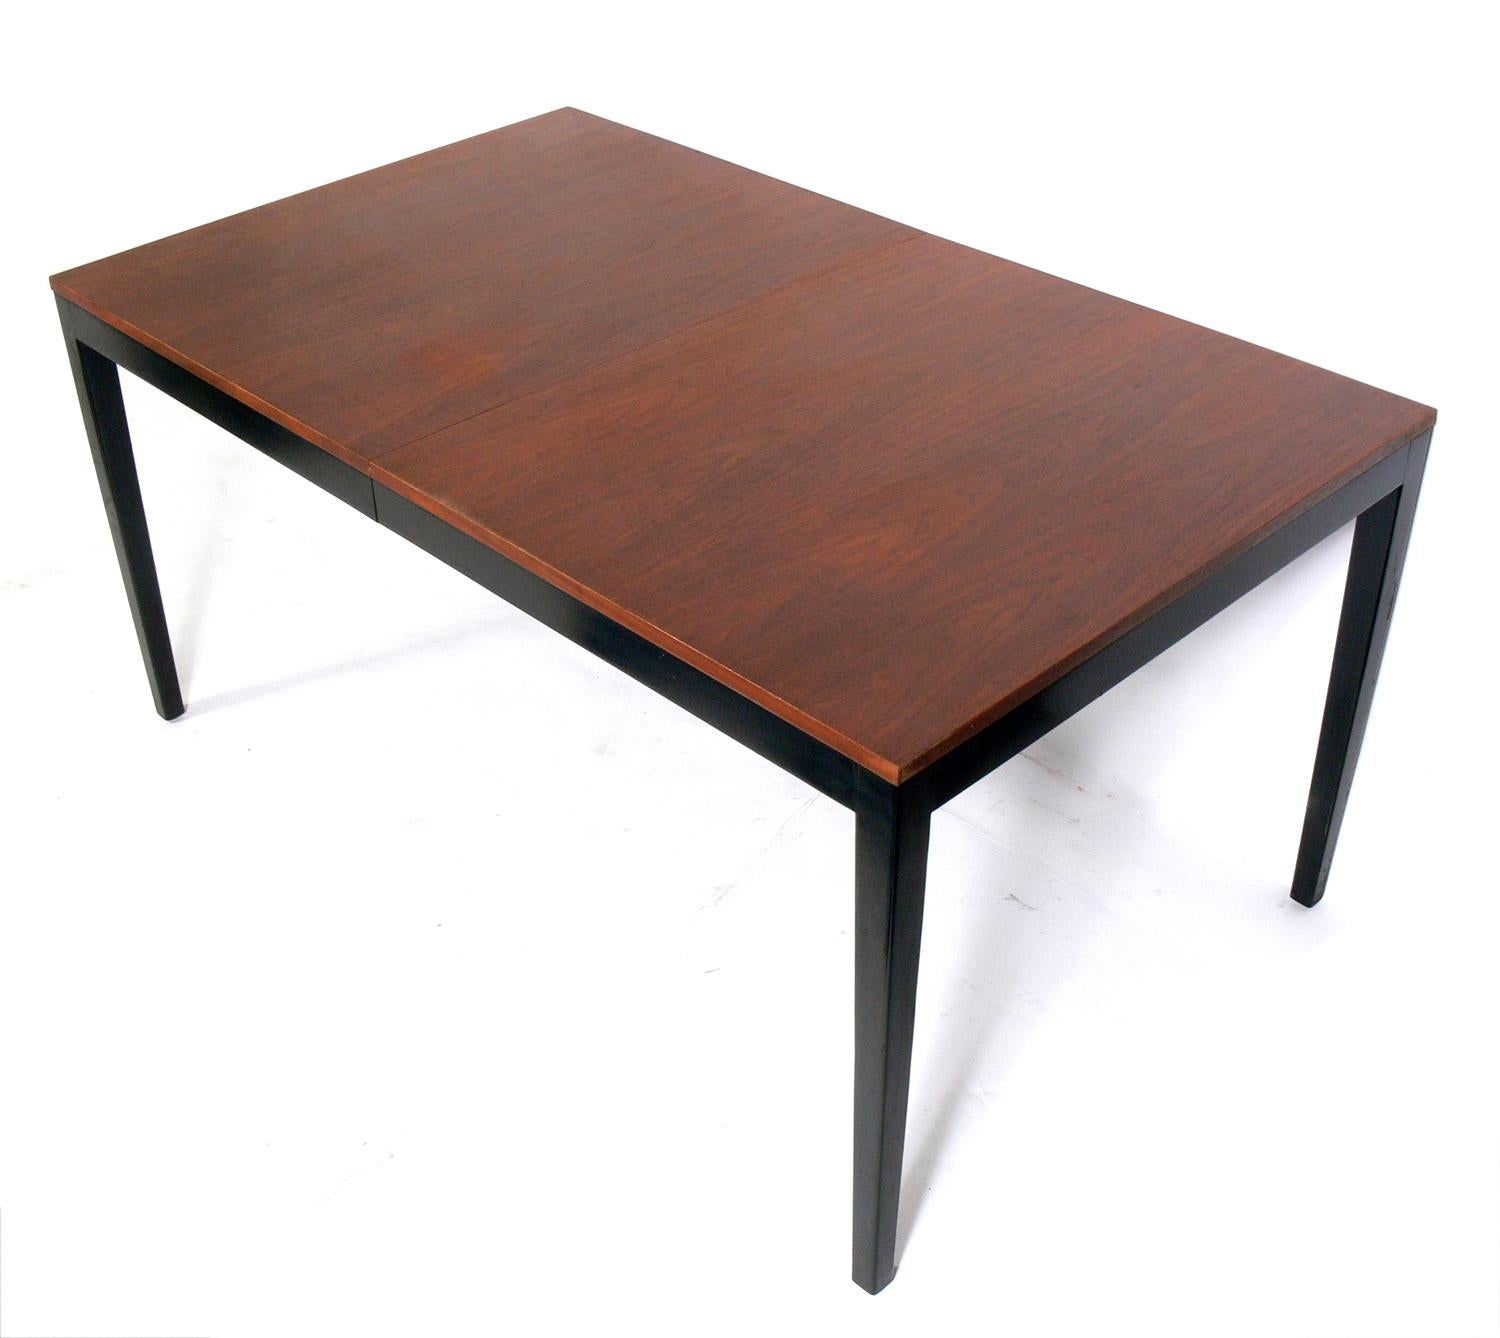 Clean lined midcentury dining table, designed by George Nelson for Herman Miller, American, circa 1960s. This piece is currently being refinished and will look incredible when it is completed. The price noted below includes refinishing. The table